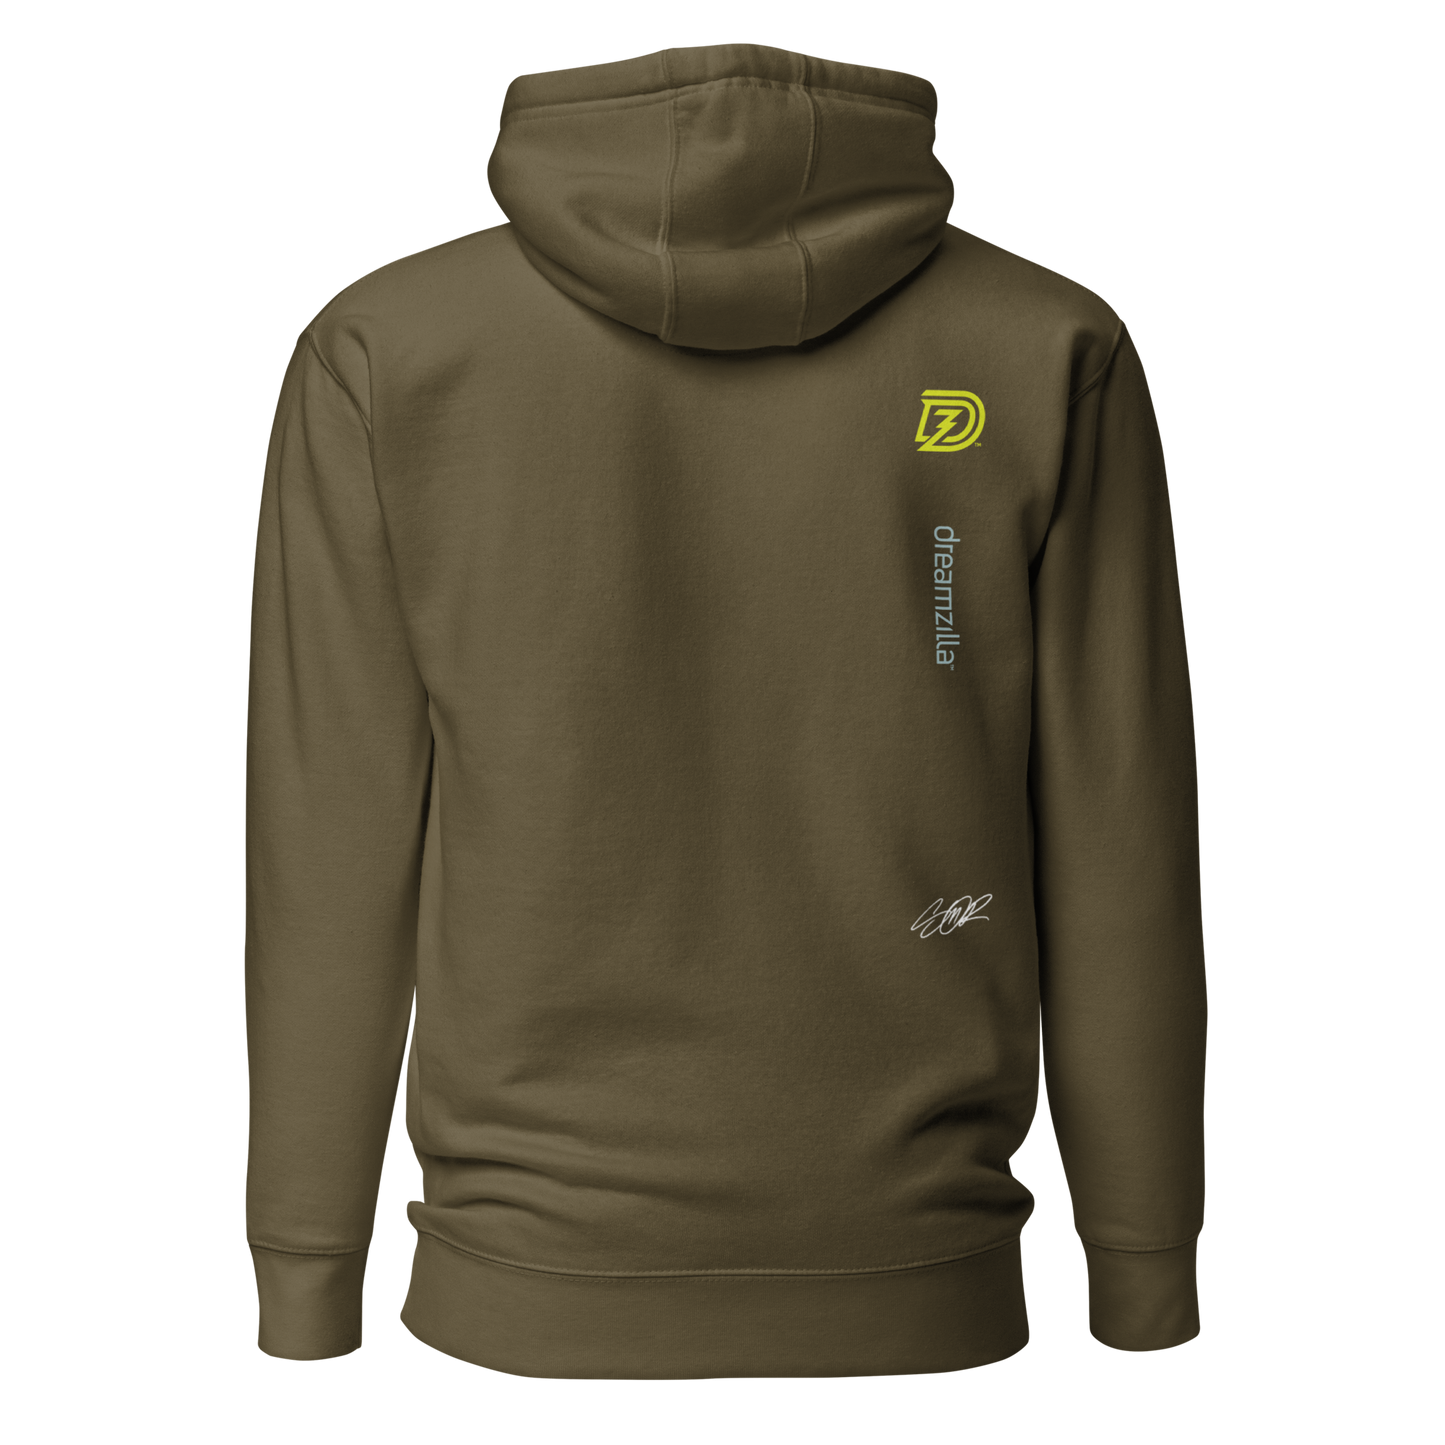 Back of Graffiti Wildstyle 2 by Sanitor Unisex Hoodie in Military Green